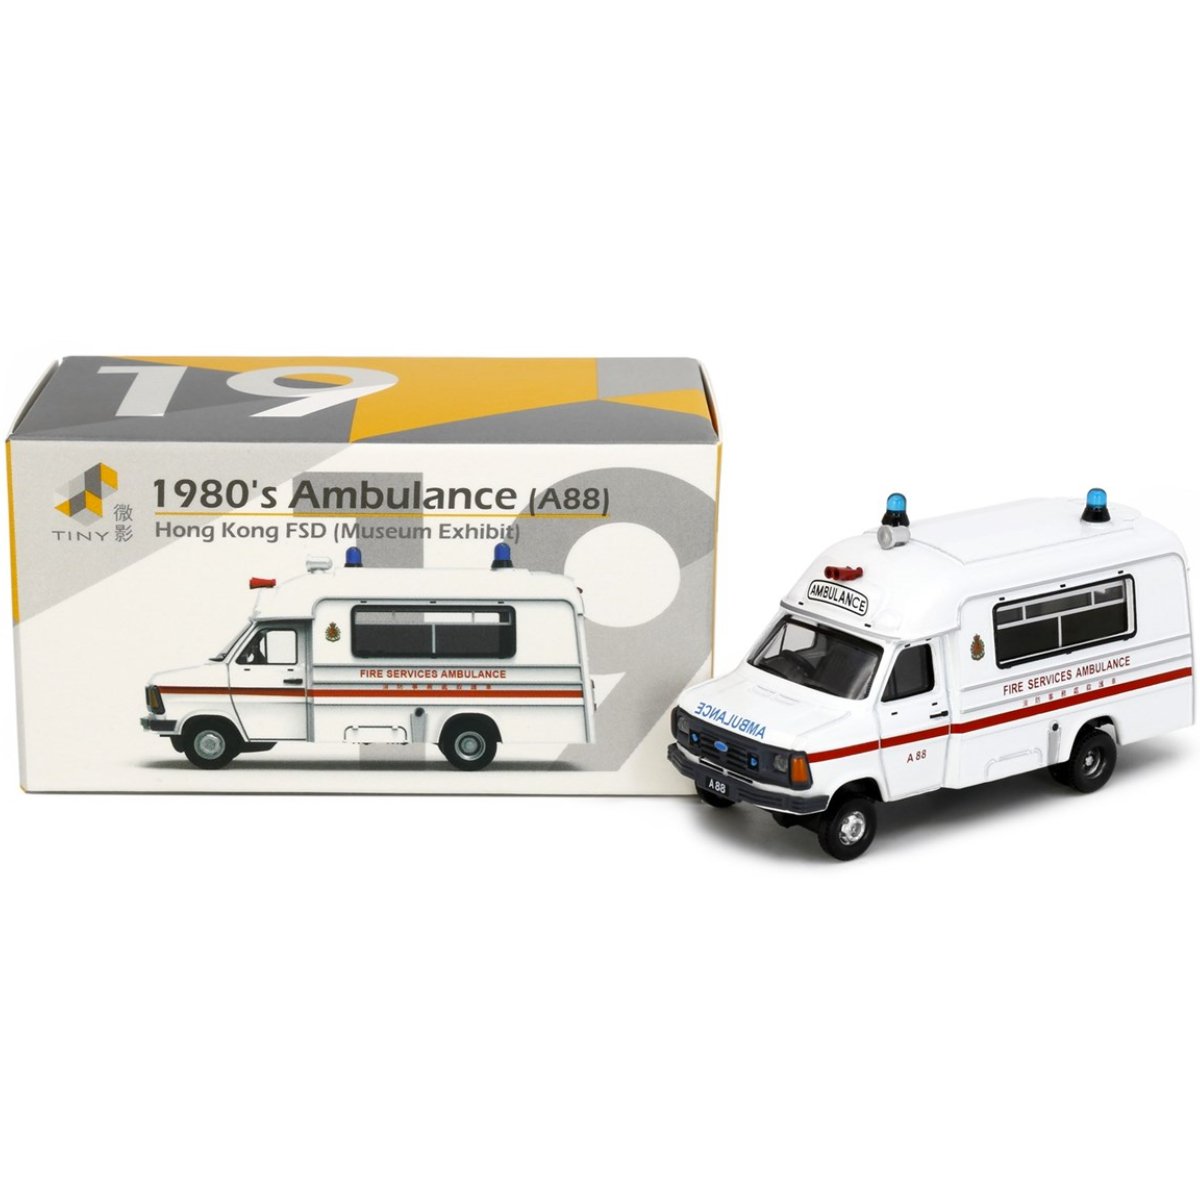 Tiny Models 1980's HKFSD Ambulance A88 Museum Version (1:76 Scale) - Phillips Hobbies